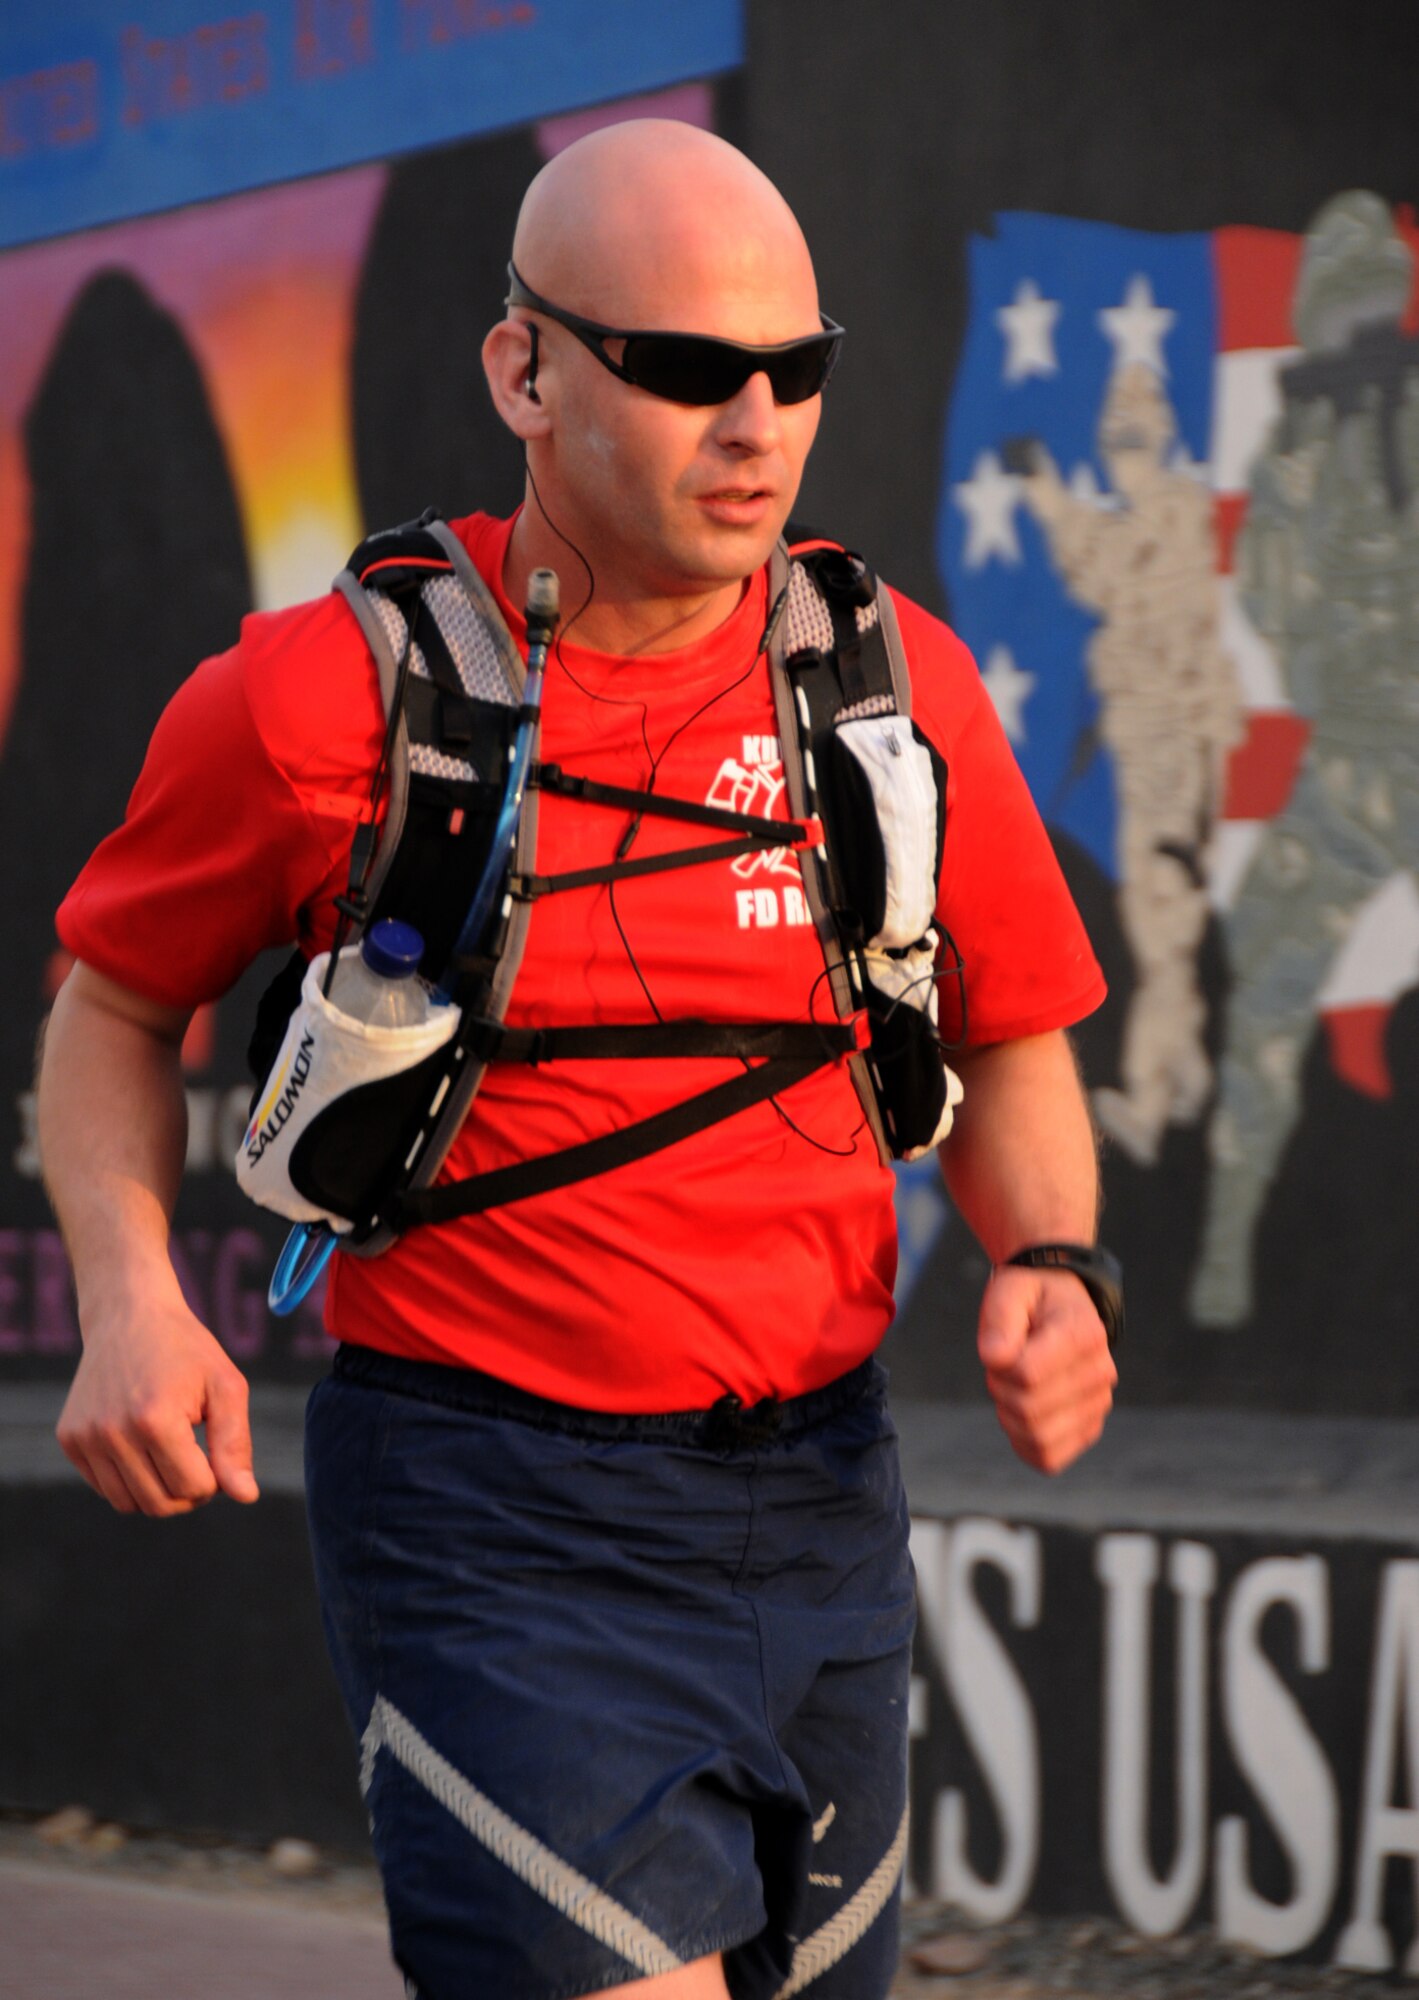 U.S. Air Force Tech. Sgt. Wayne Jenderny, 386th Expeditionary Civil Engineering Squadron firefighter, runs with the goal of reaching 100 miles in less than 24 hours at an undisclosed location, Southwest Asia, April 7, 2012. Jenderny, Minnesota Air National Guard member deployed from the 148th Fighter Wing and native of Eyota, Minn., ran 100 miles in less than 24 hours to raise awareness and take donations for a fellow firefighter's daughter who is suffering from a painful nerve disorder. (U.S. Air Force photo by Staff Sgt. James Lieth)